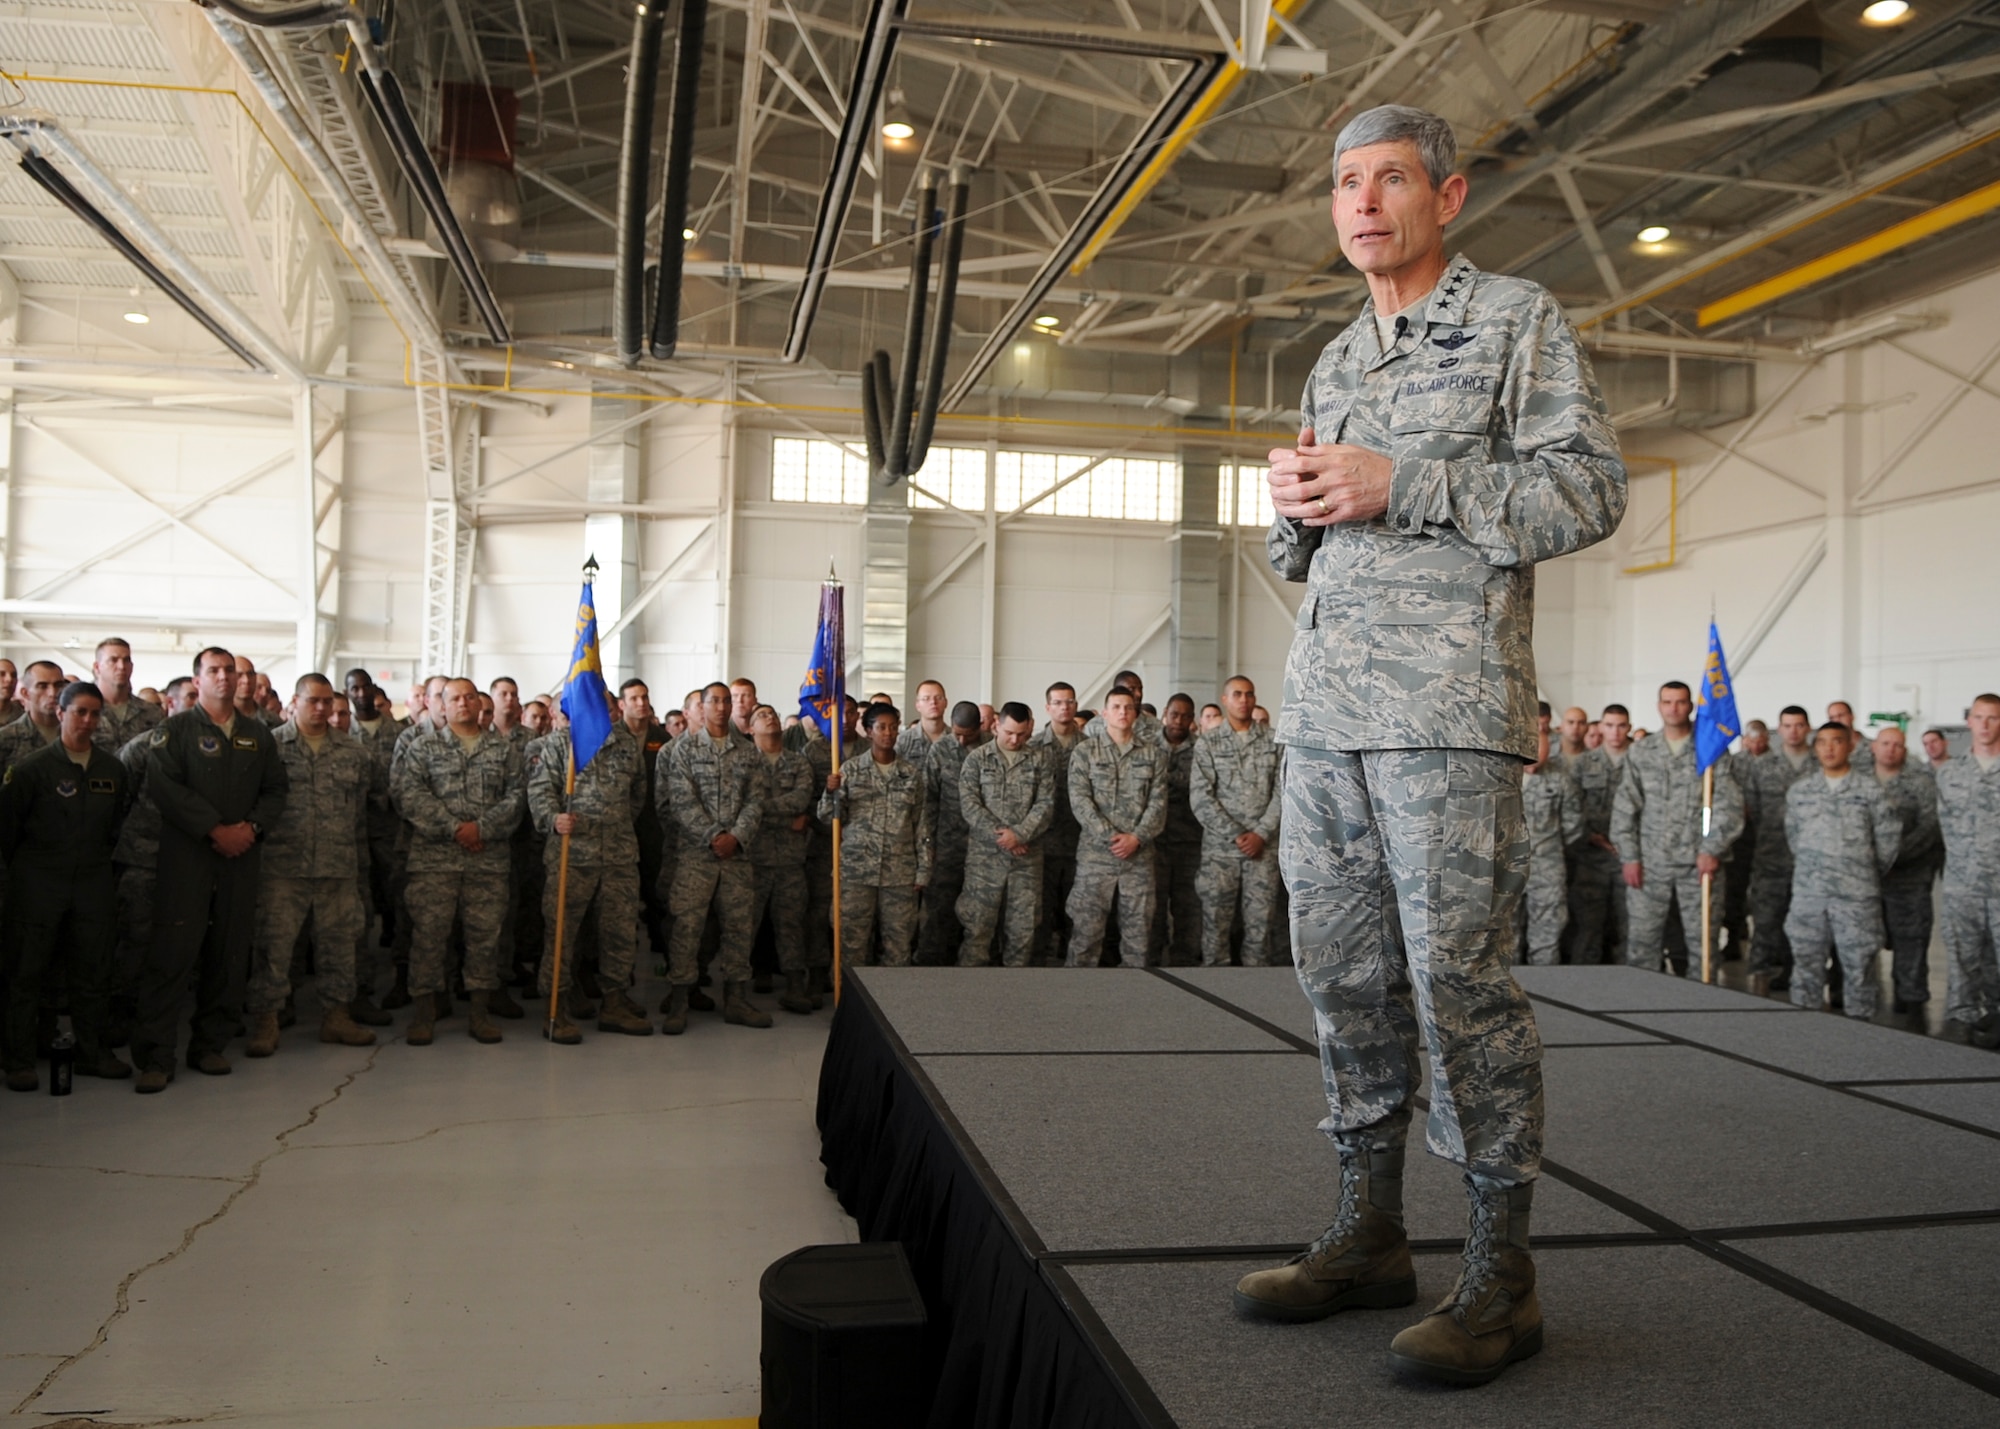 Air Force Chief of Staff Gen. Norton Schwartz speaks to Airmen Oct. 4, 2011, during an all-call at Minot Air Force Base, N.D. Schwartz expressed gratitude for their efforts in aiding the Minot, N.D., community, as well as each other, during the flooding this past summer.  (U.S. Air Force photo/Senior Airman Ashley N. Avecilla)